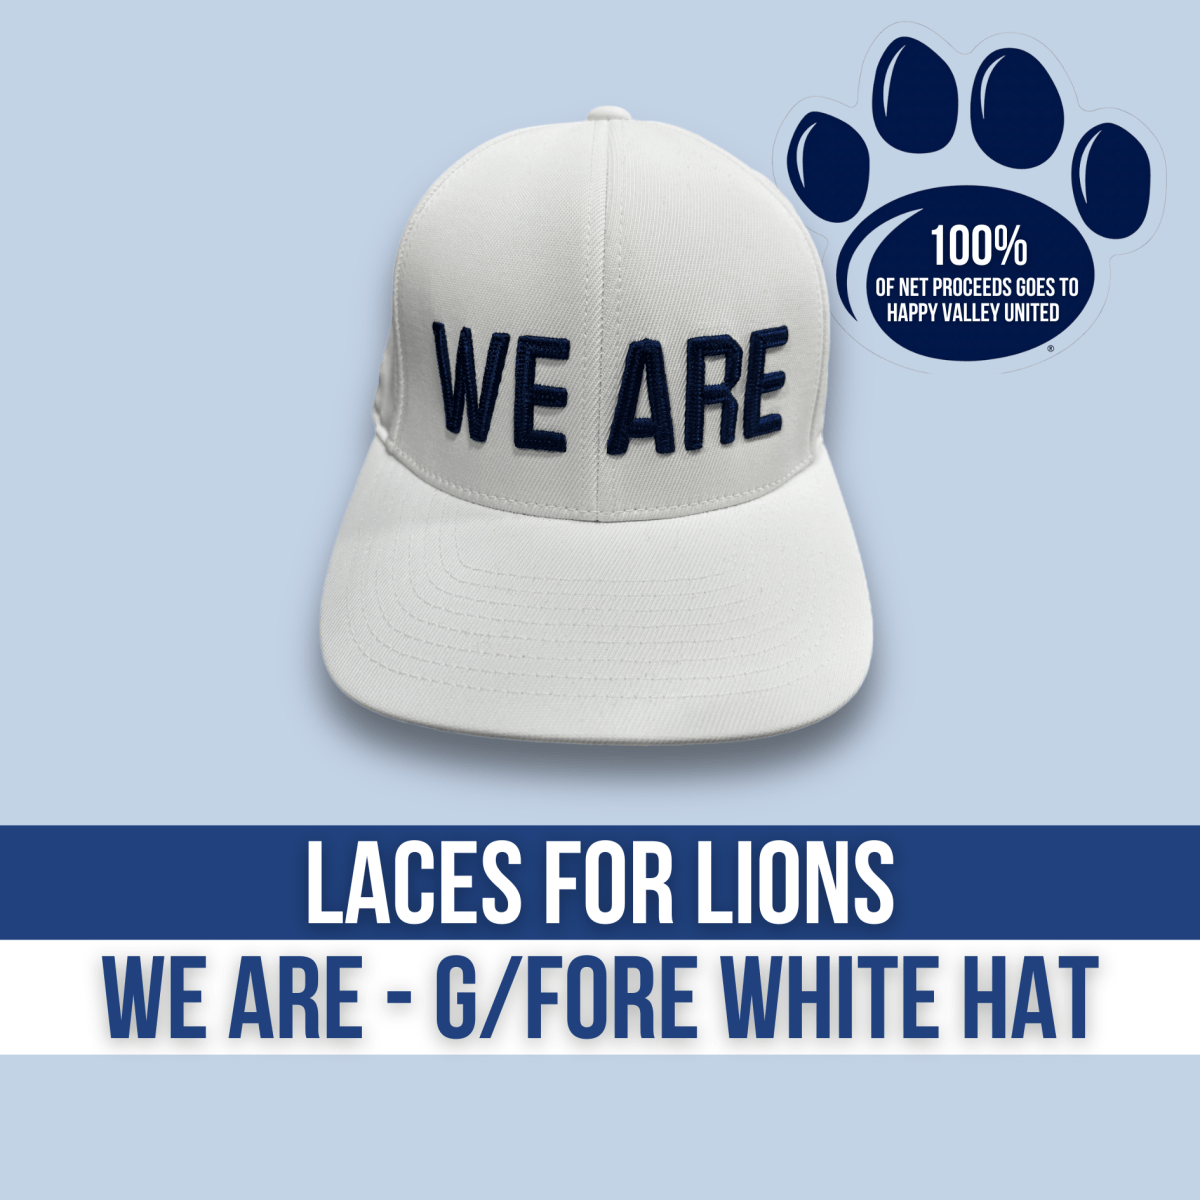 Laces for Lions White "WE ARE" Happy Valley United G/FORE 110 Hat - sneaker - Hats - G/Fore - Jawns on Fire